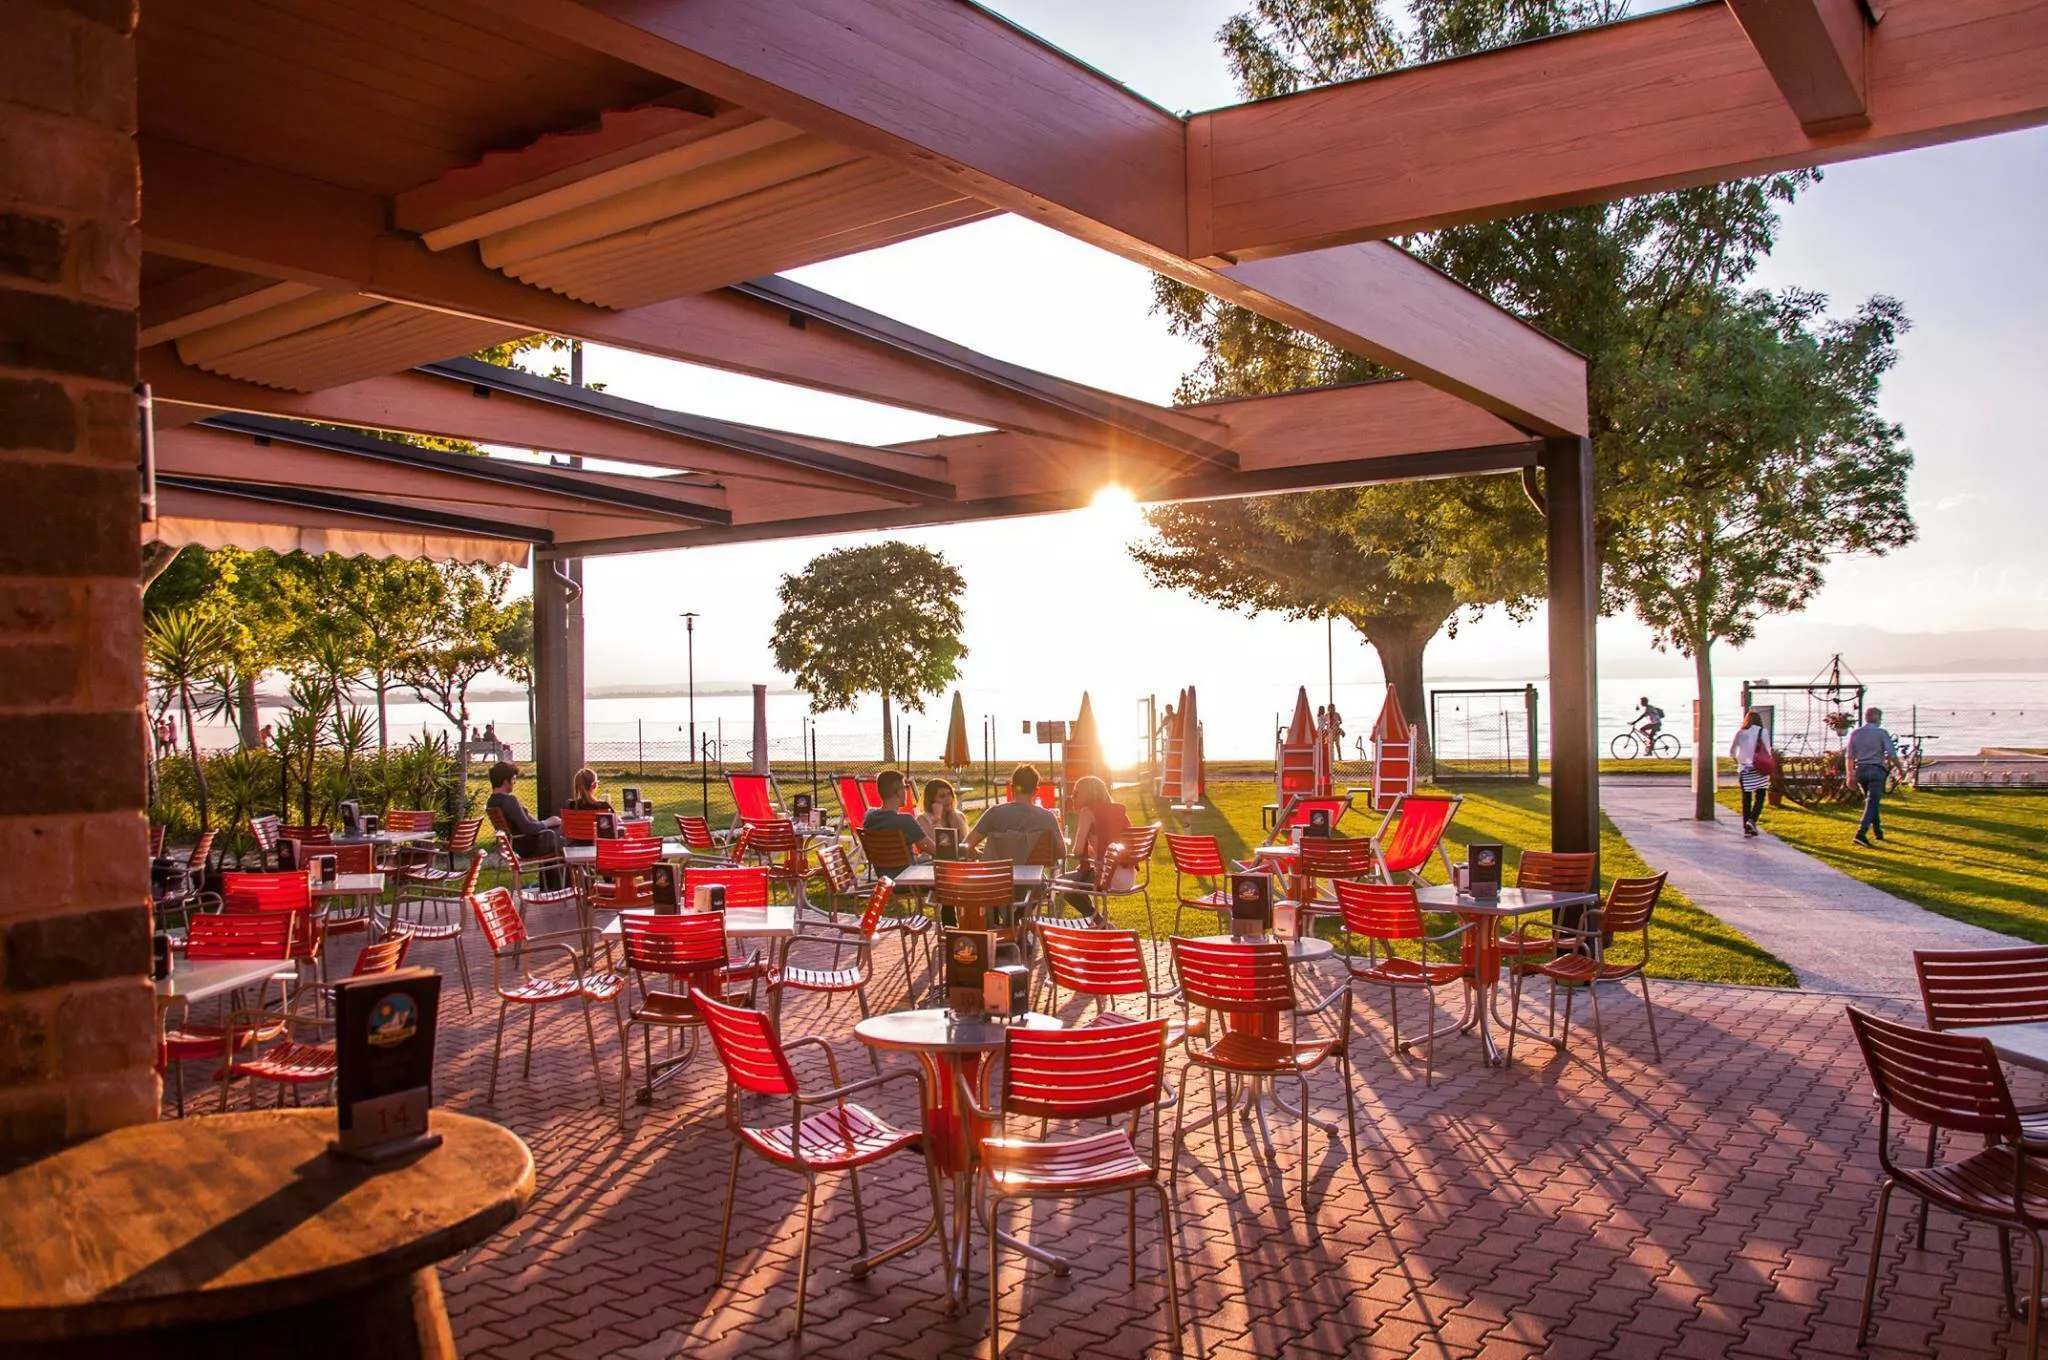 Lido Garda Beach Cafe in Italy, Europe | Cafes - Rated 3.3